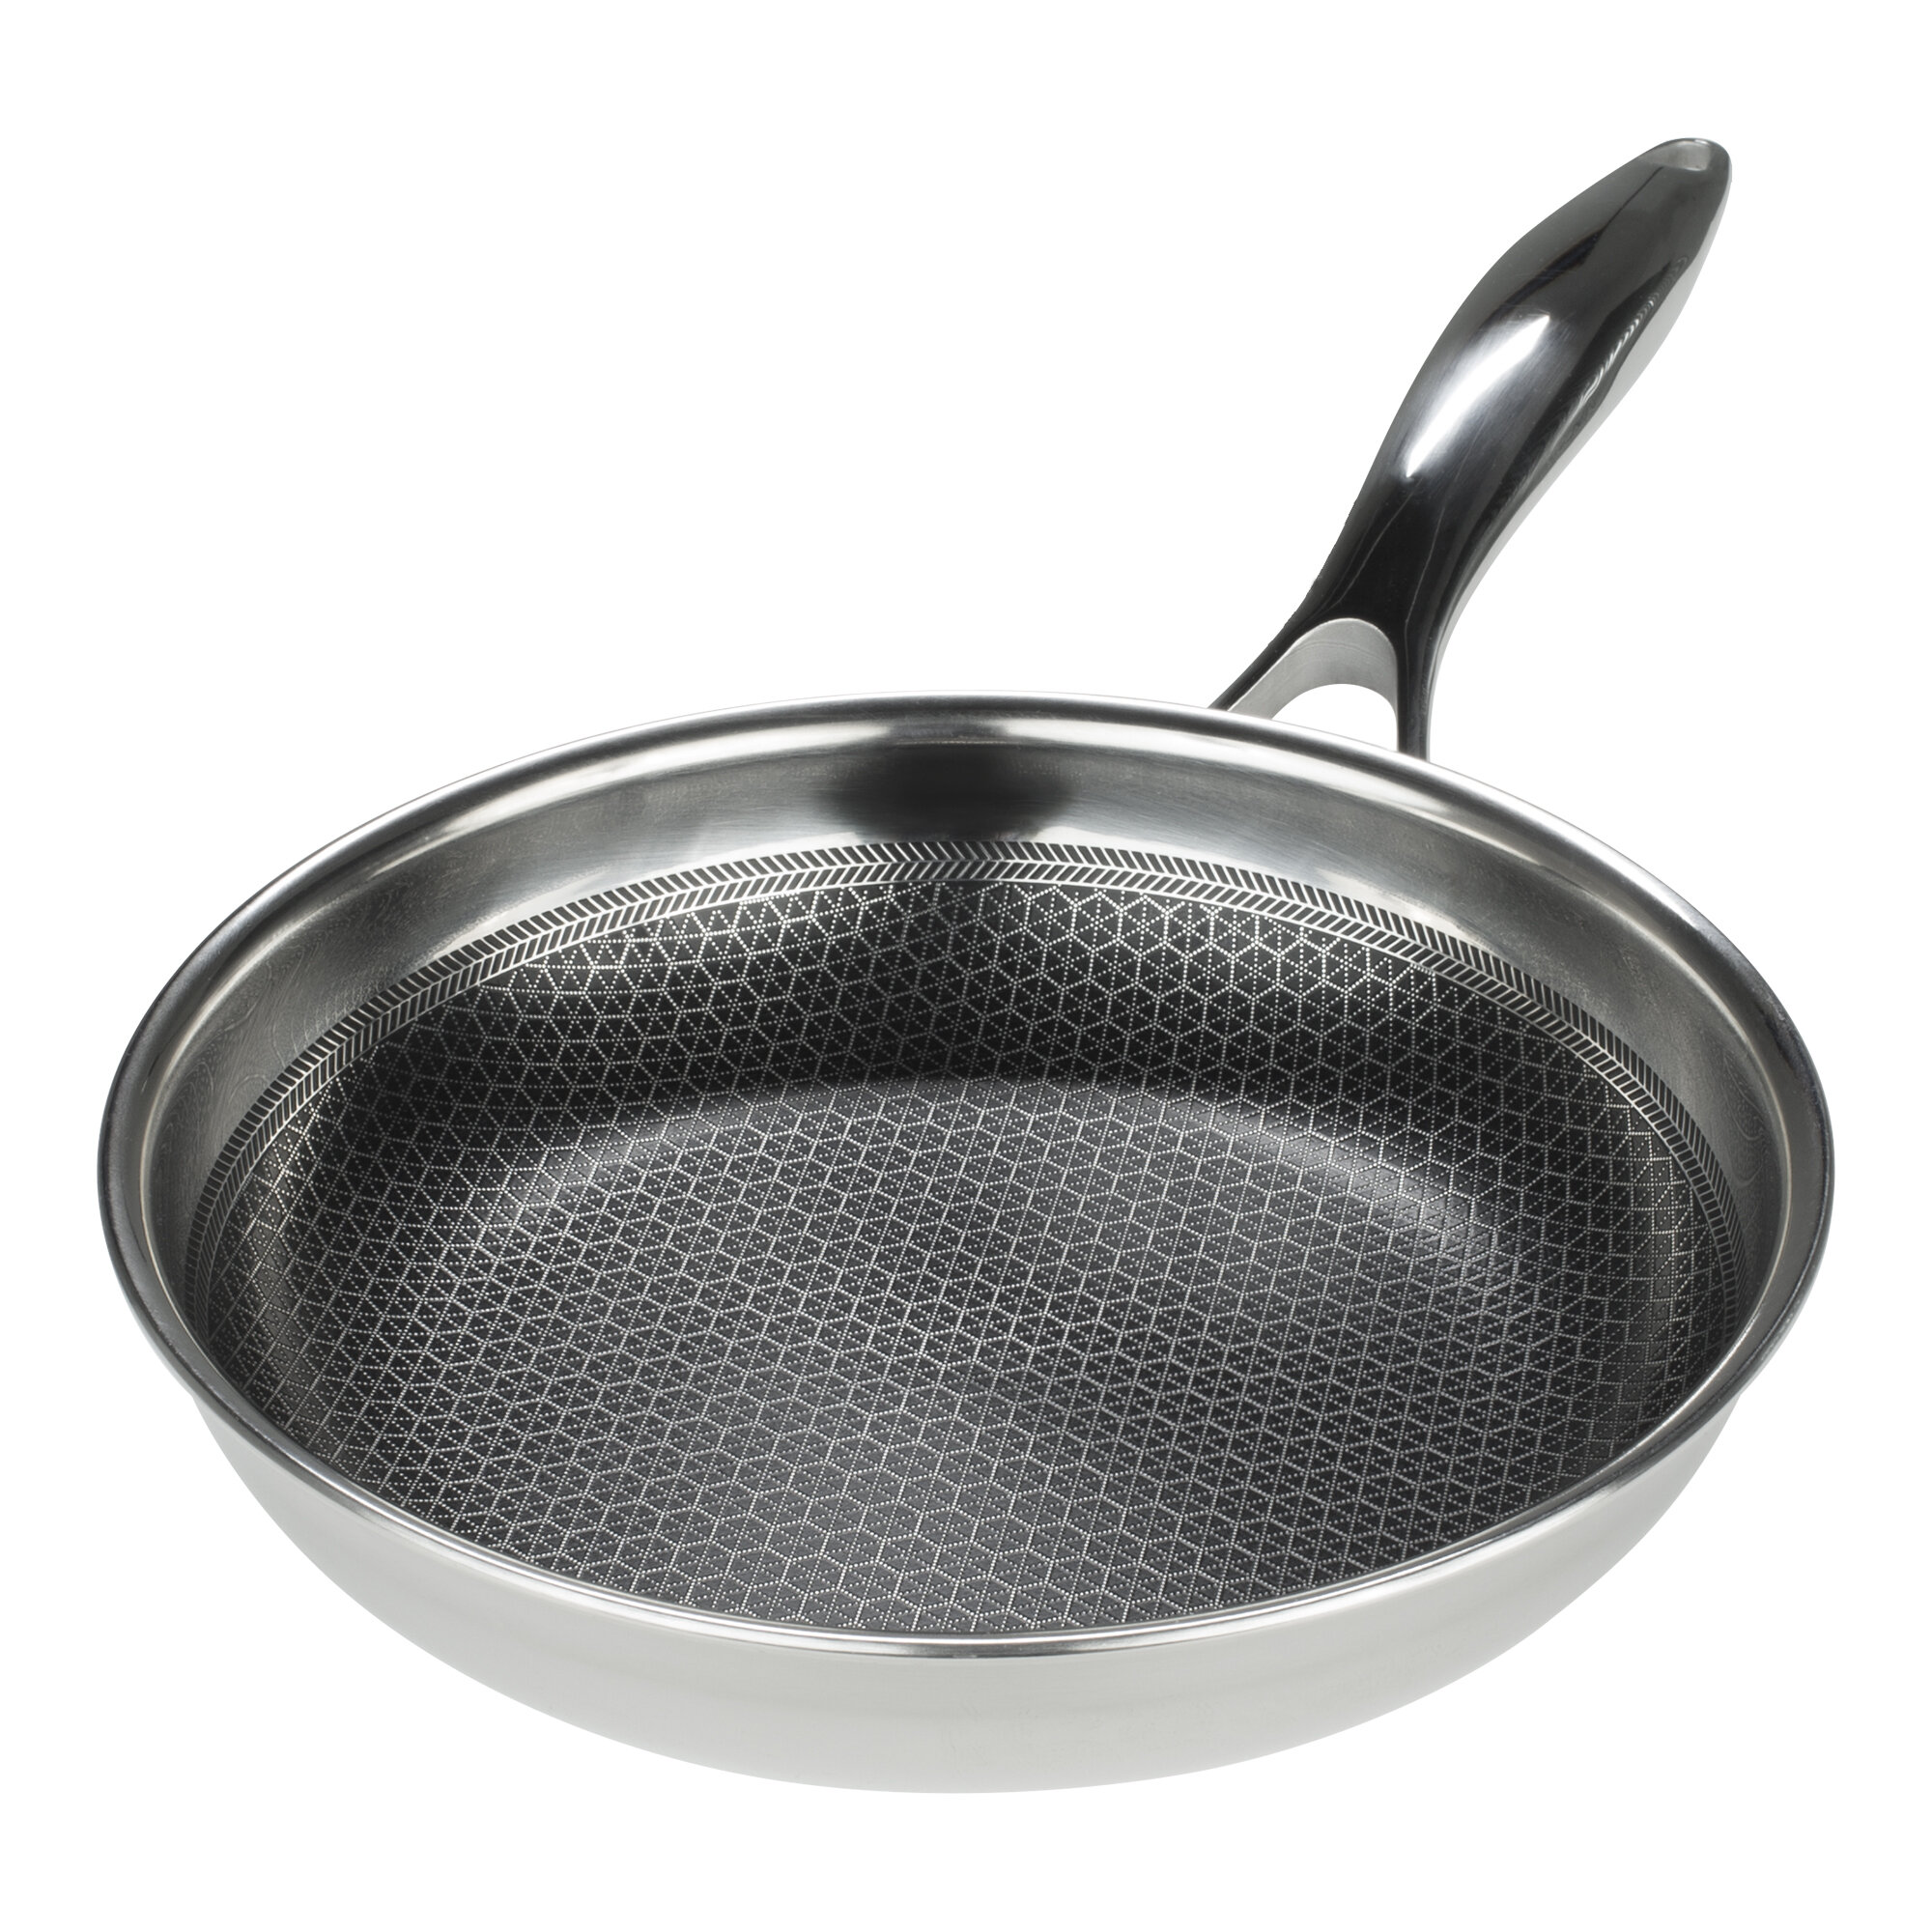 T-fal Simply Cook Nonstick Cookware, Fry Pan, 12.5, Black